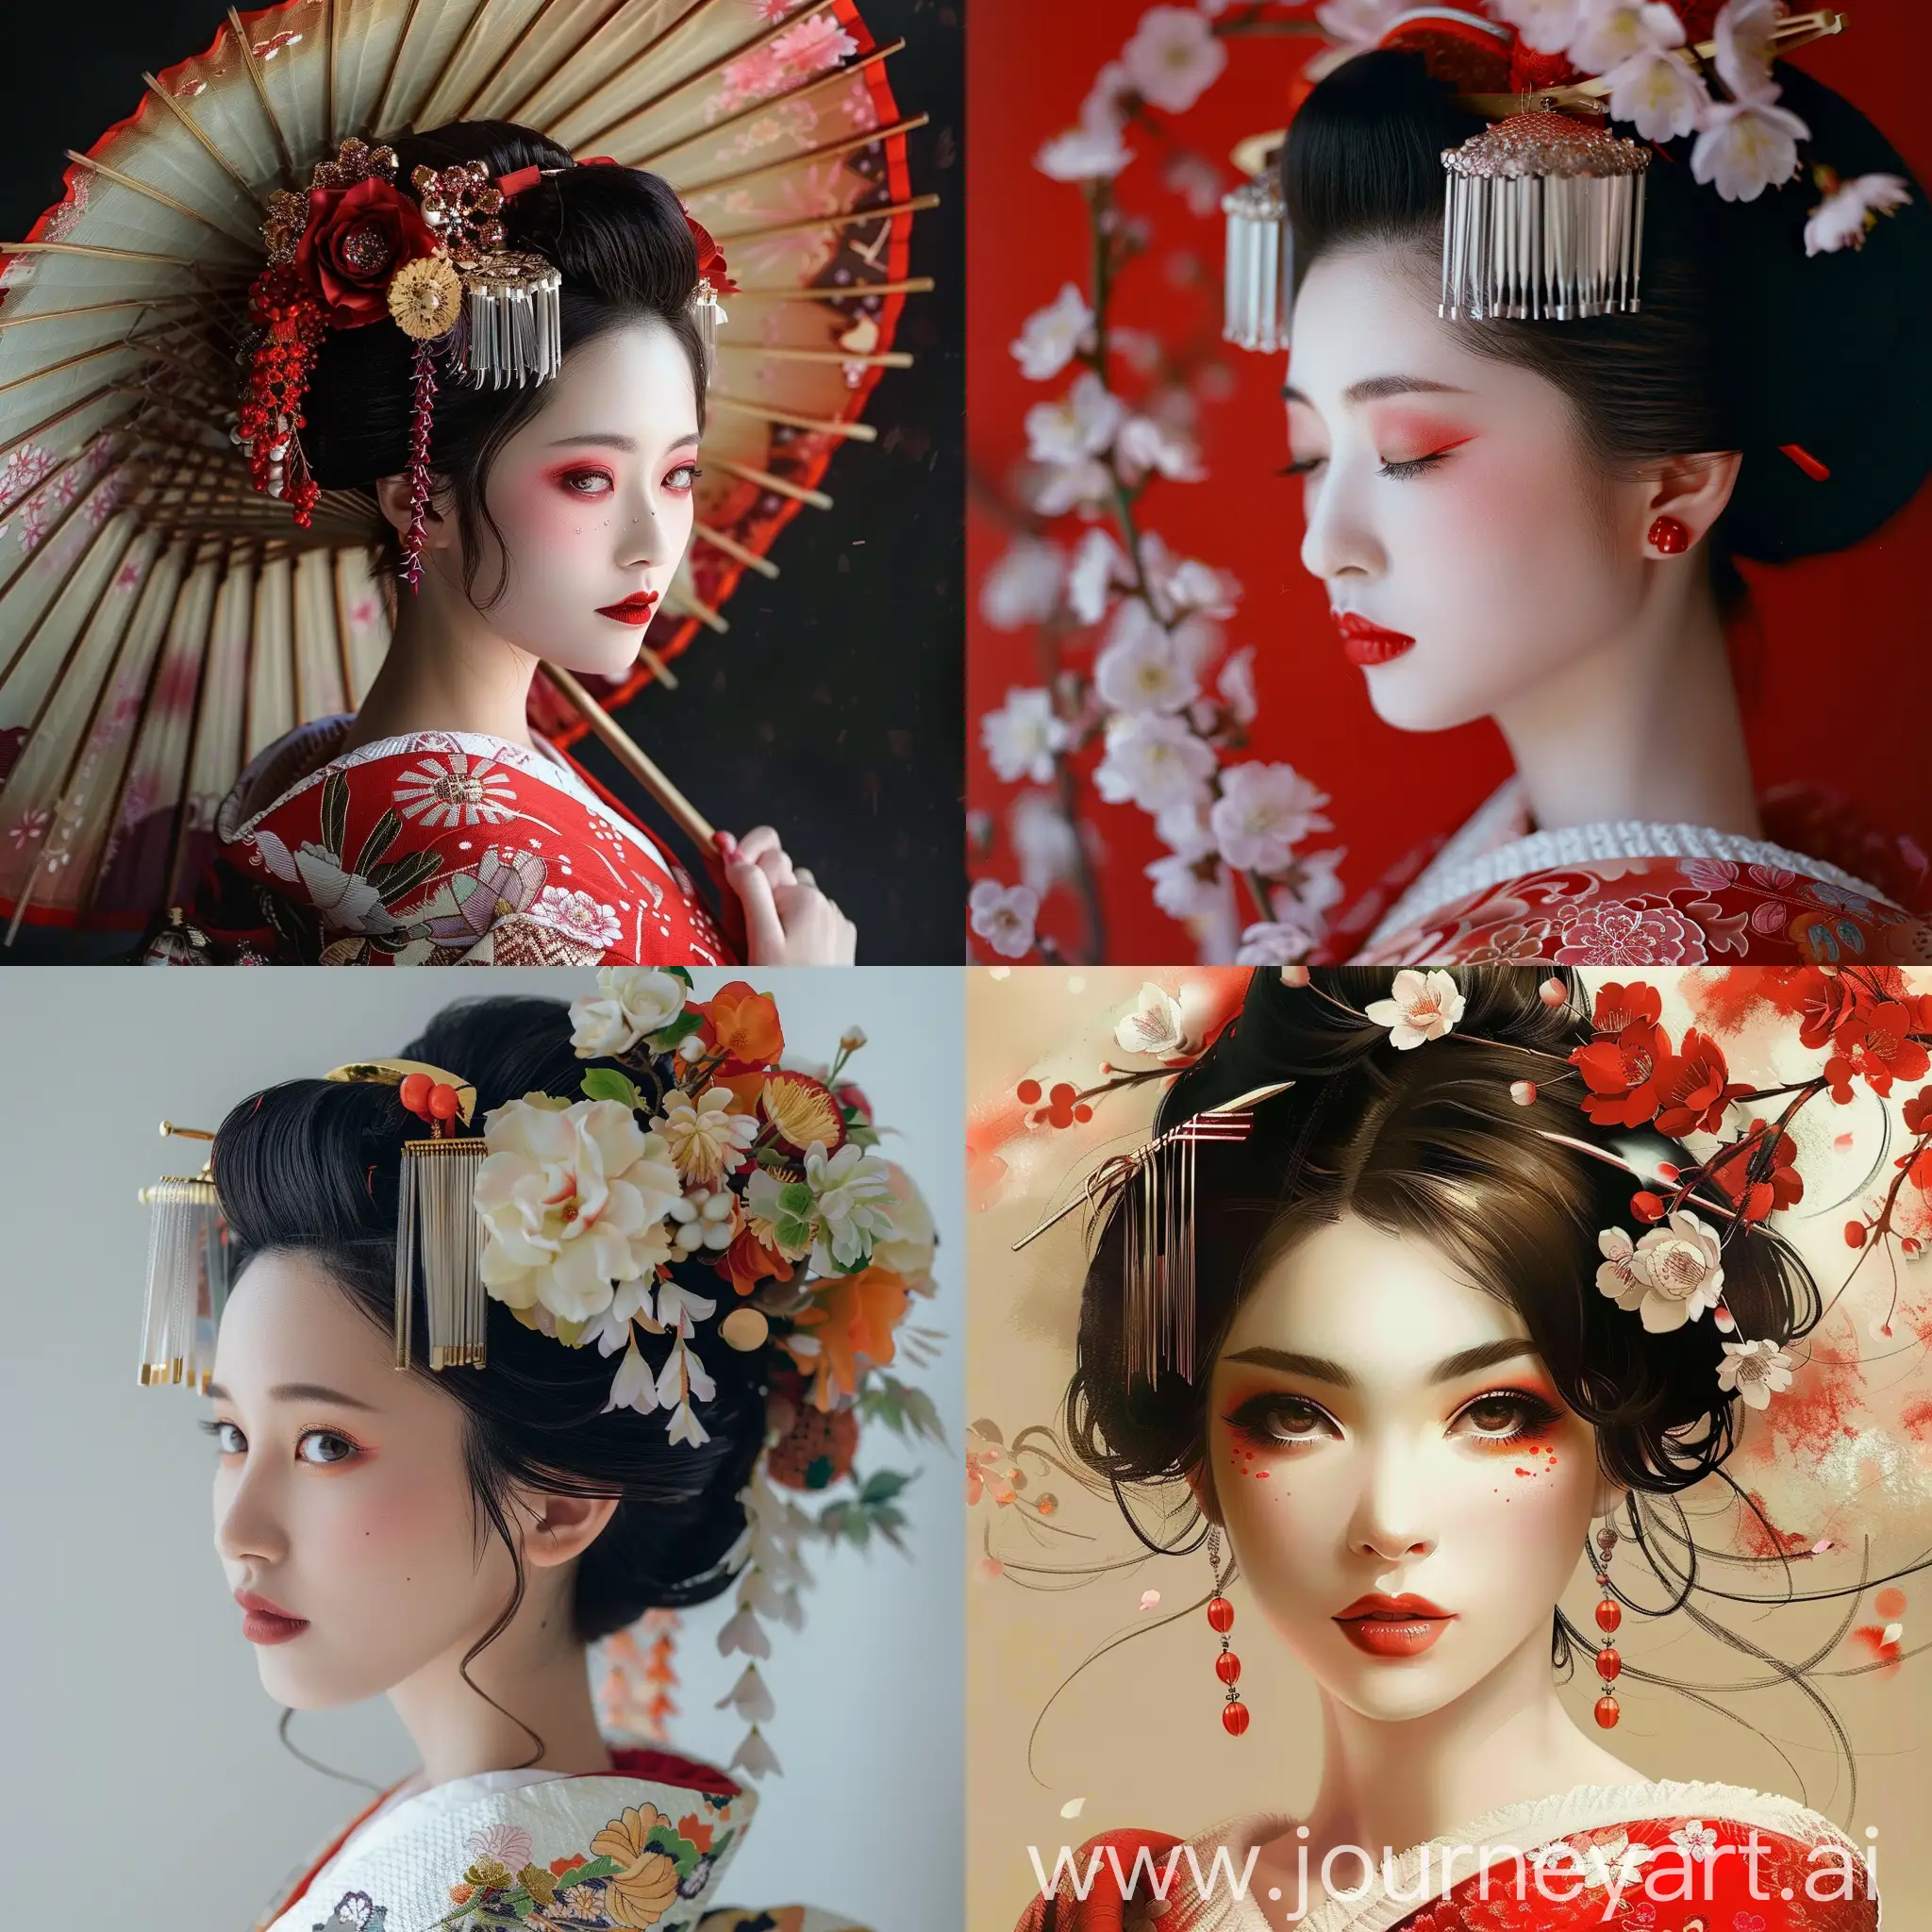 Elegant-Japanese-Beauty-in-a-11-Aspect-Ratio-Image-Version-6